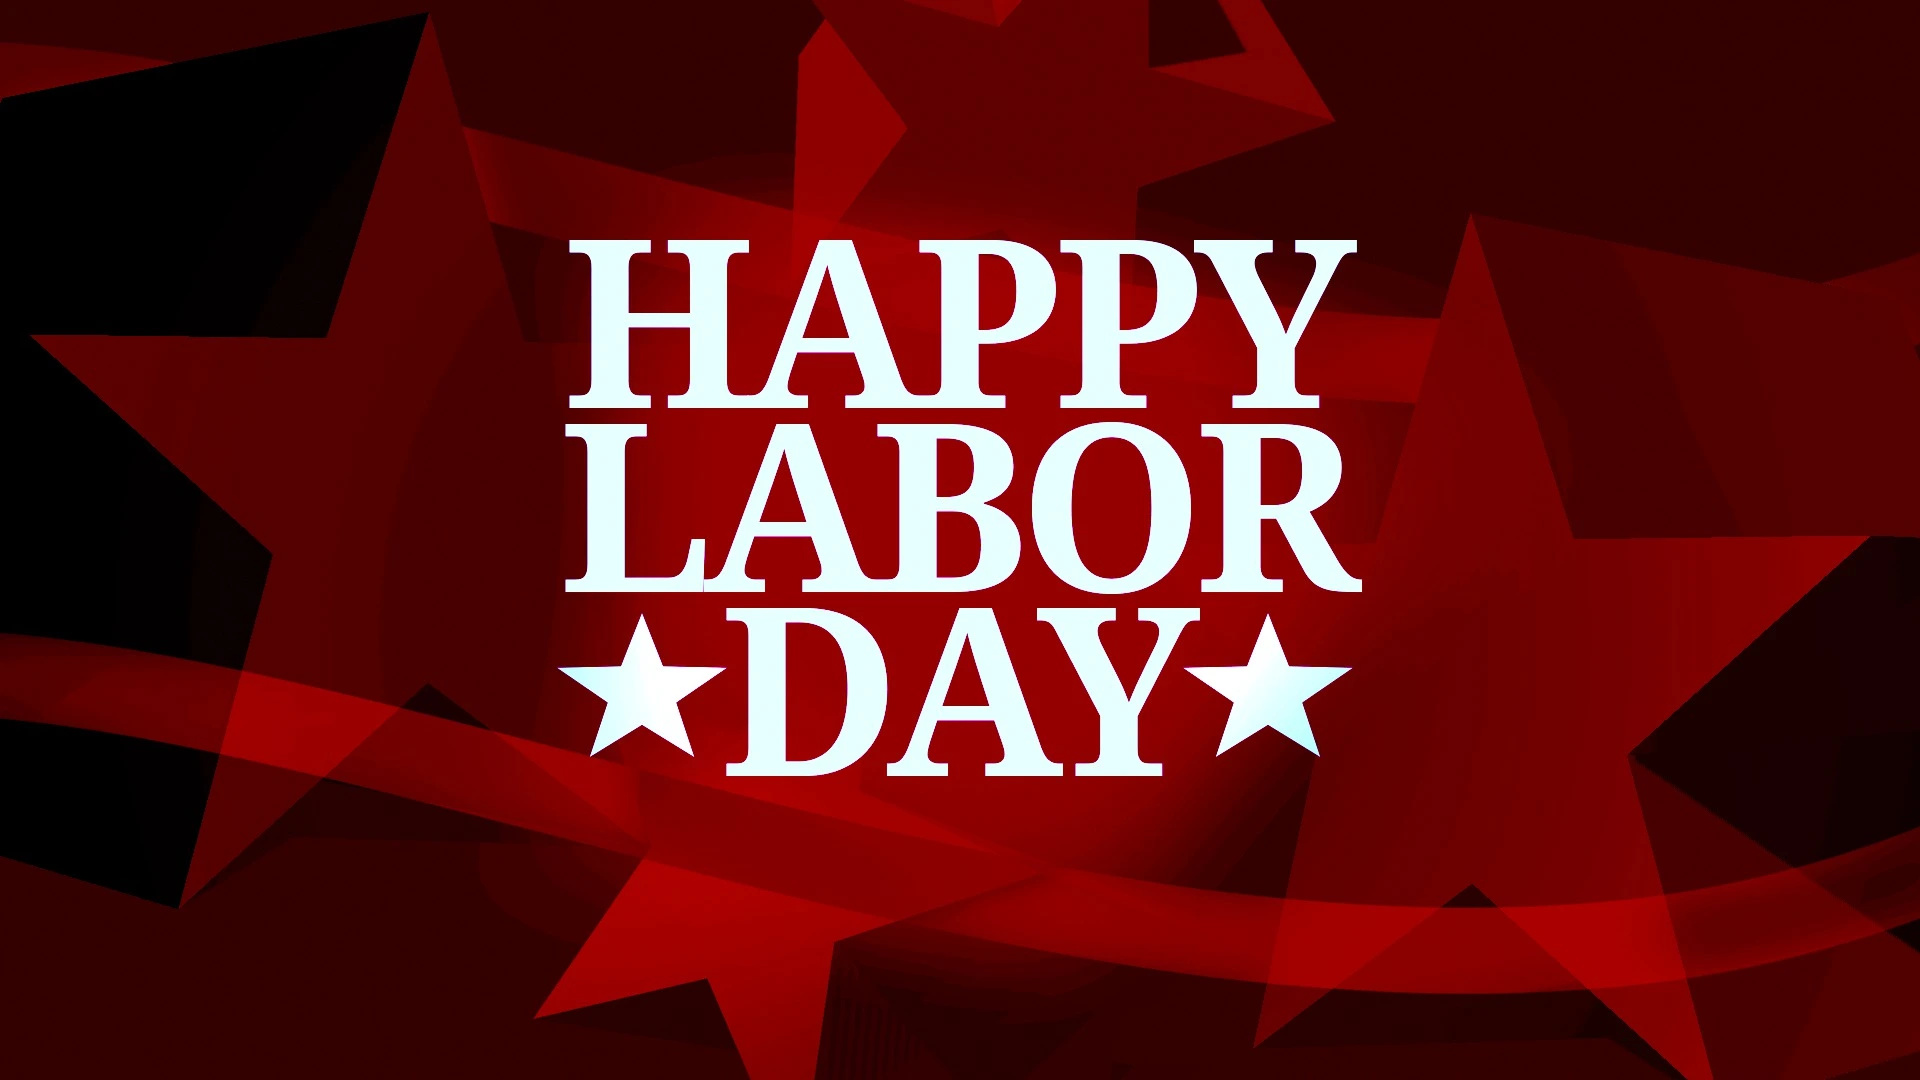 Labor Day guide, Events and activities, Holiday traditions, Long weekend, 1920x1080 Full HD Desktop